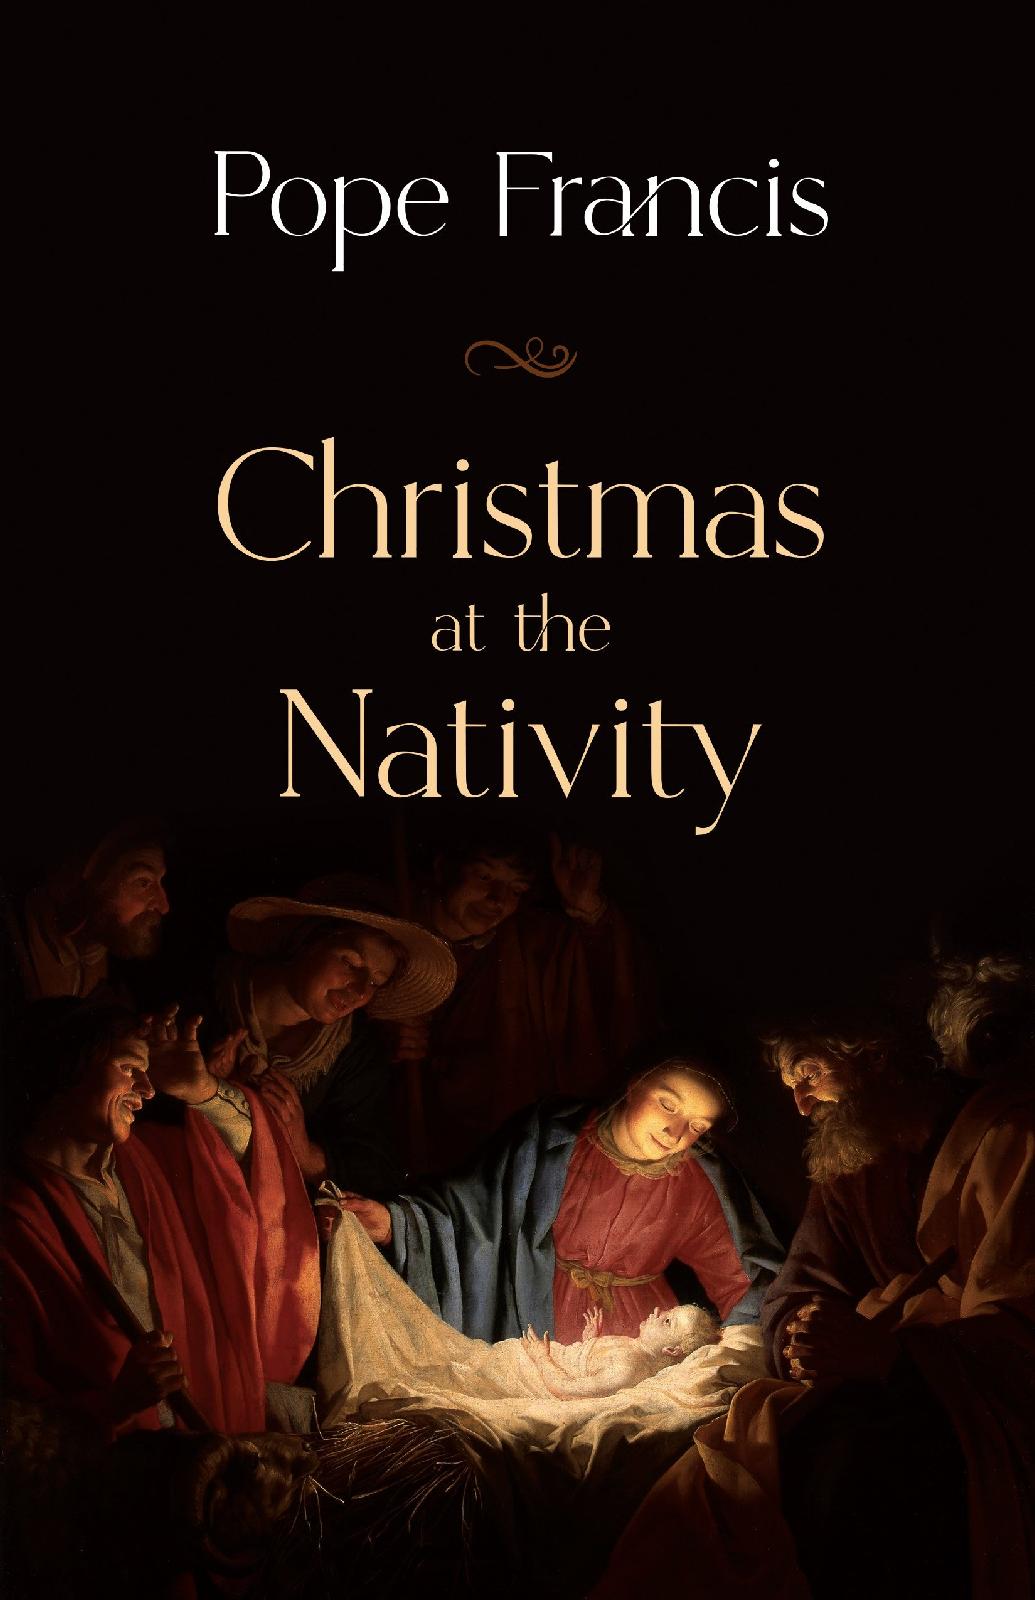 Christmas at the Nativity book cover